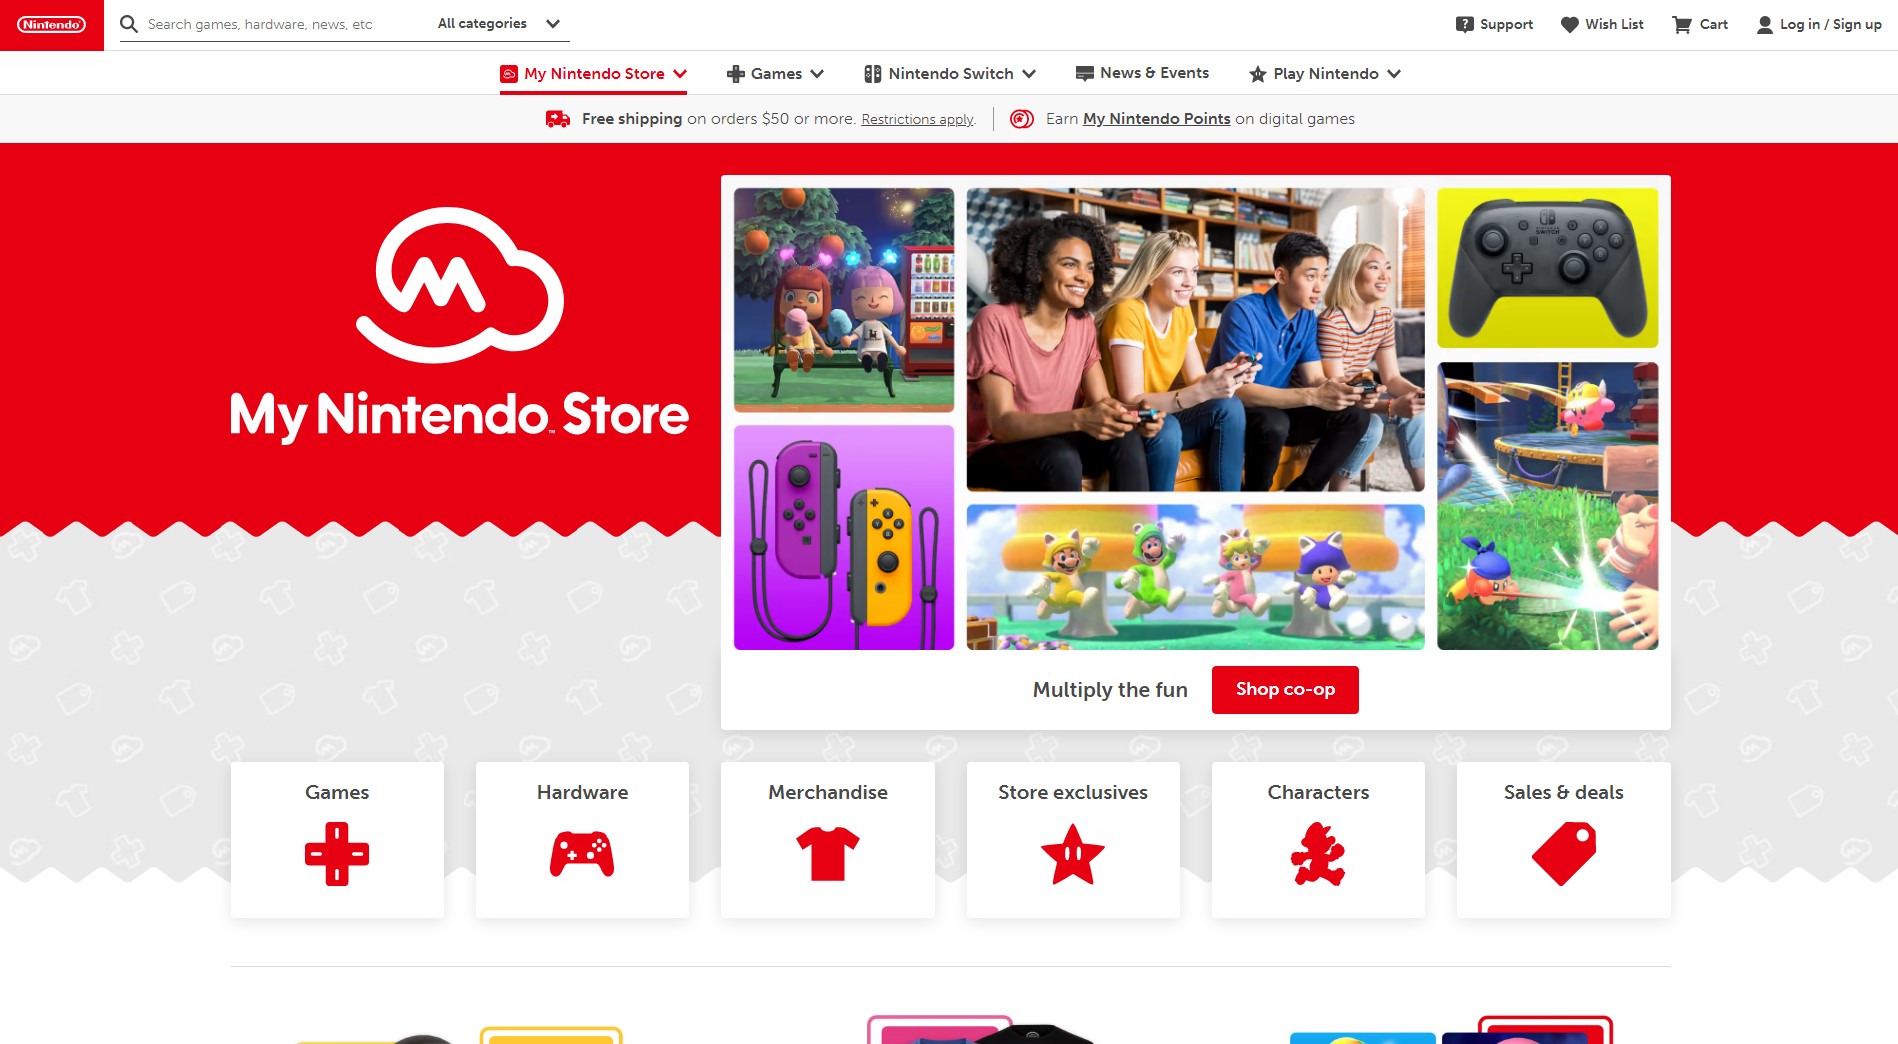 Nintendo relaunches their online store